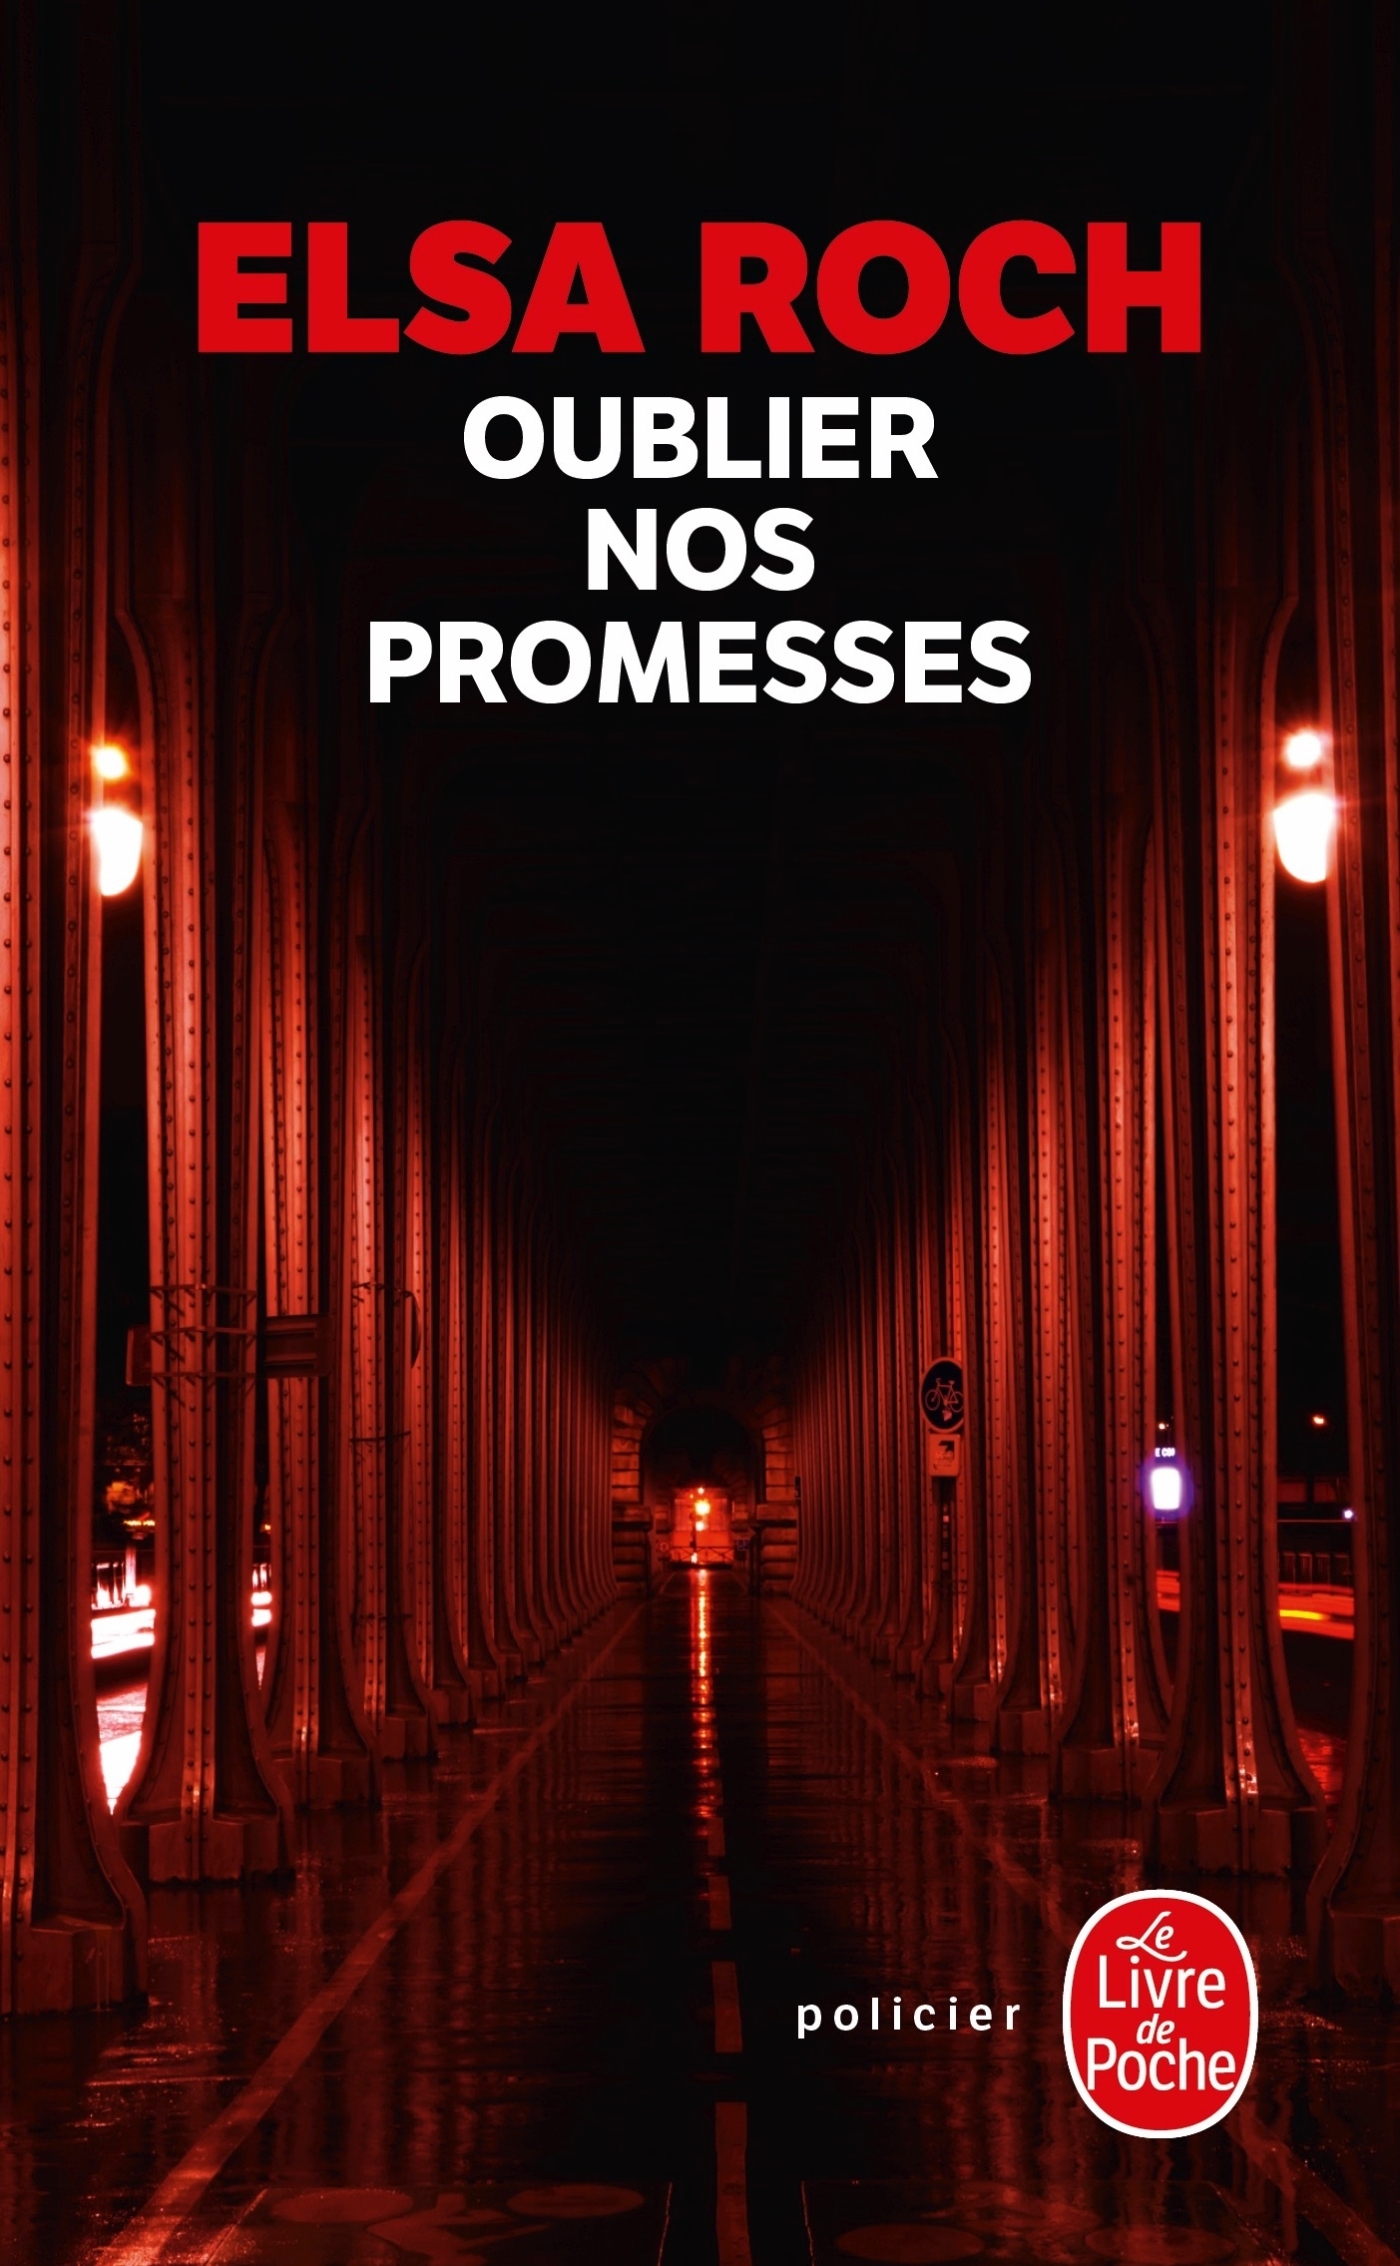 Oublier nos promesses (9782253257981-front-cover)